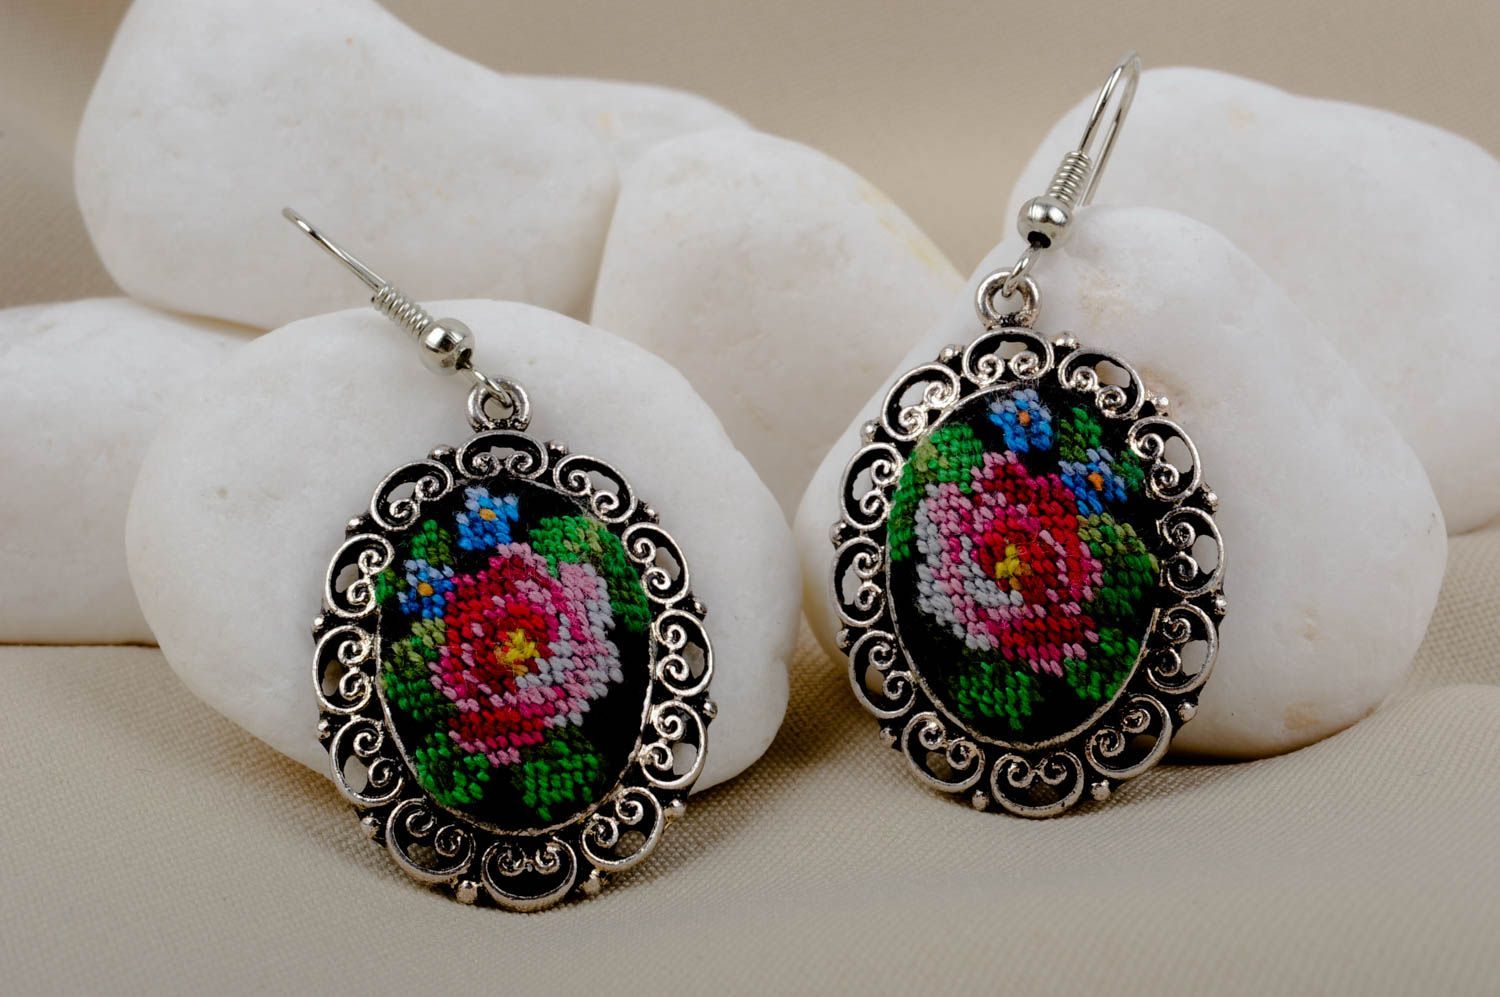 Handmade metal earrings embroidered earrings cross stitch ideas gifts for her photo 1